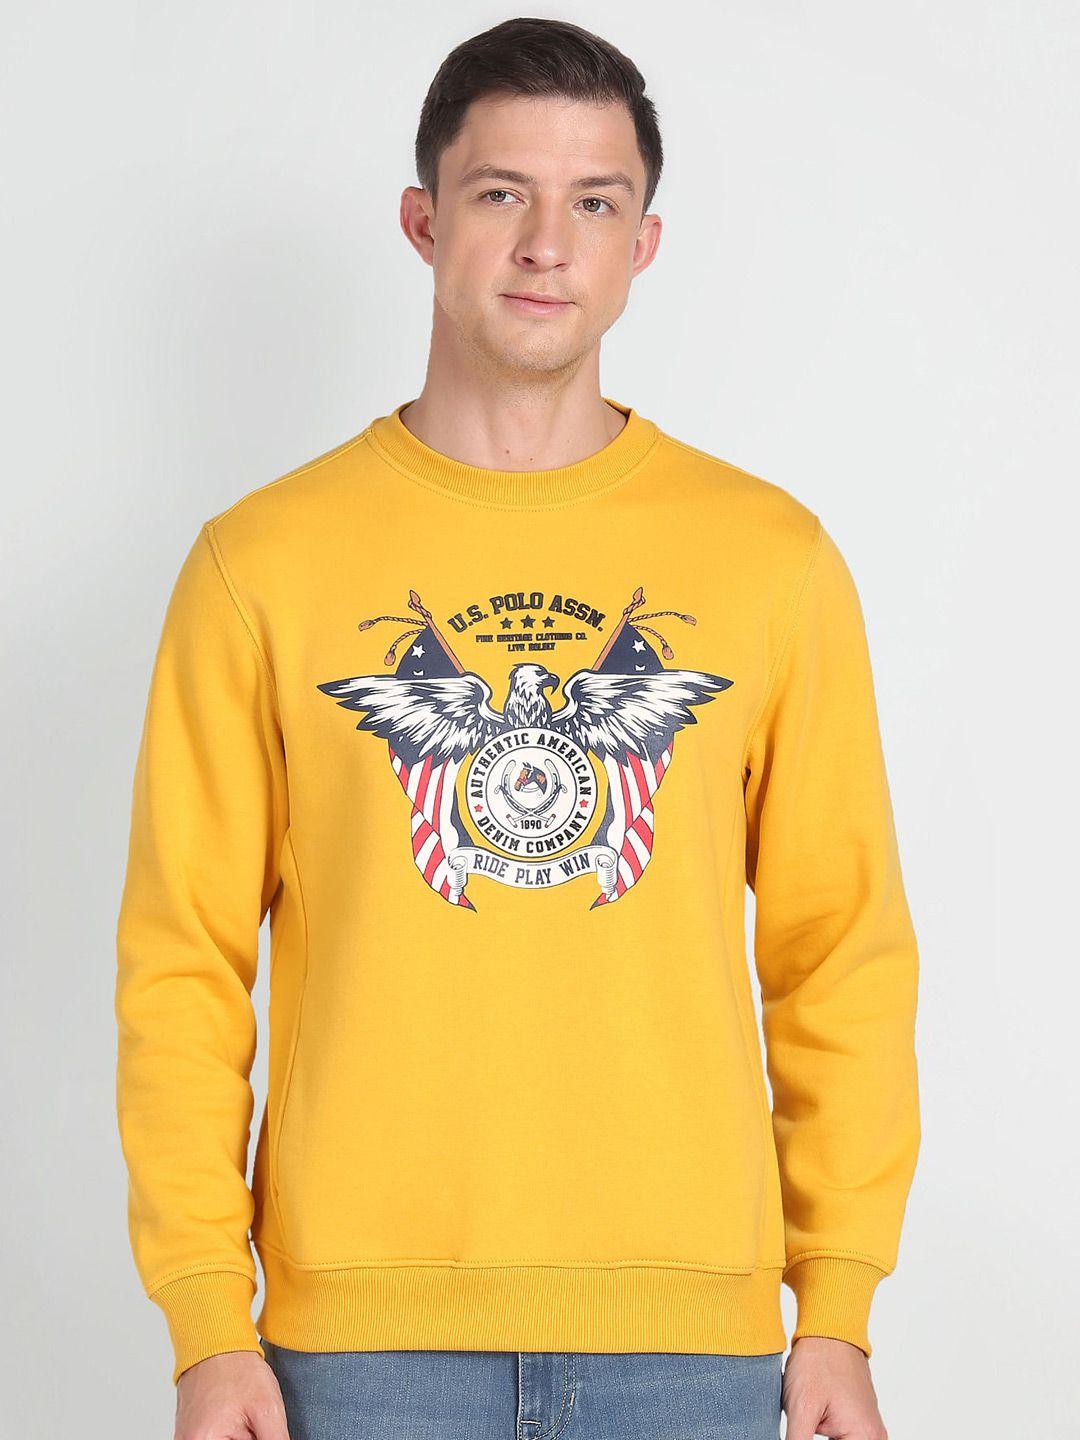 u.s. polo assn. denim co. graphic printed pullover